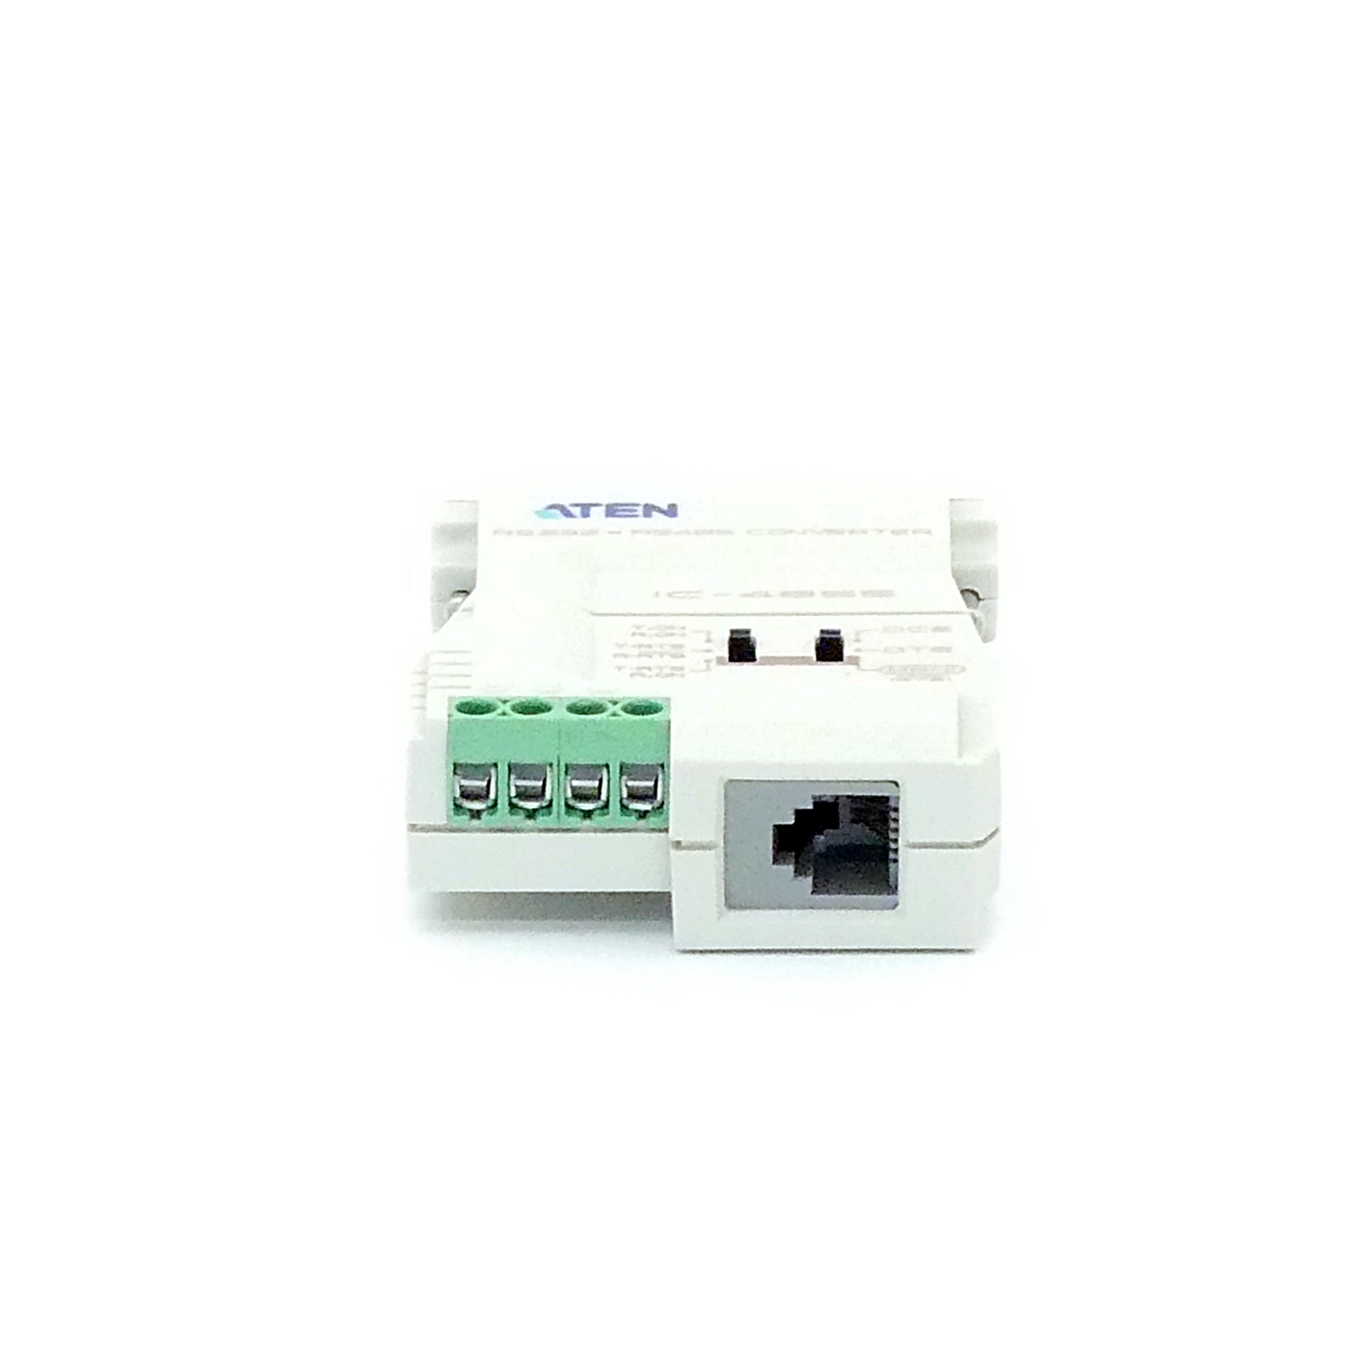 2 Pieces Interface converter RS-232 auf RS-485 